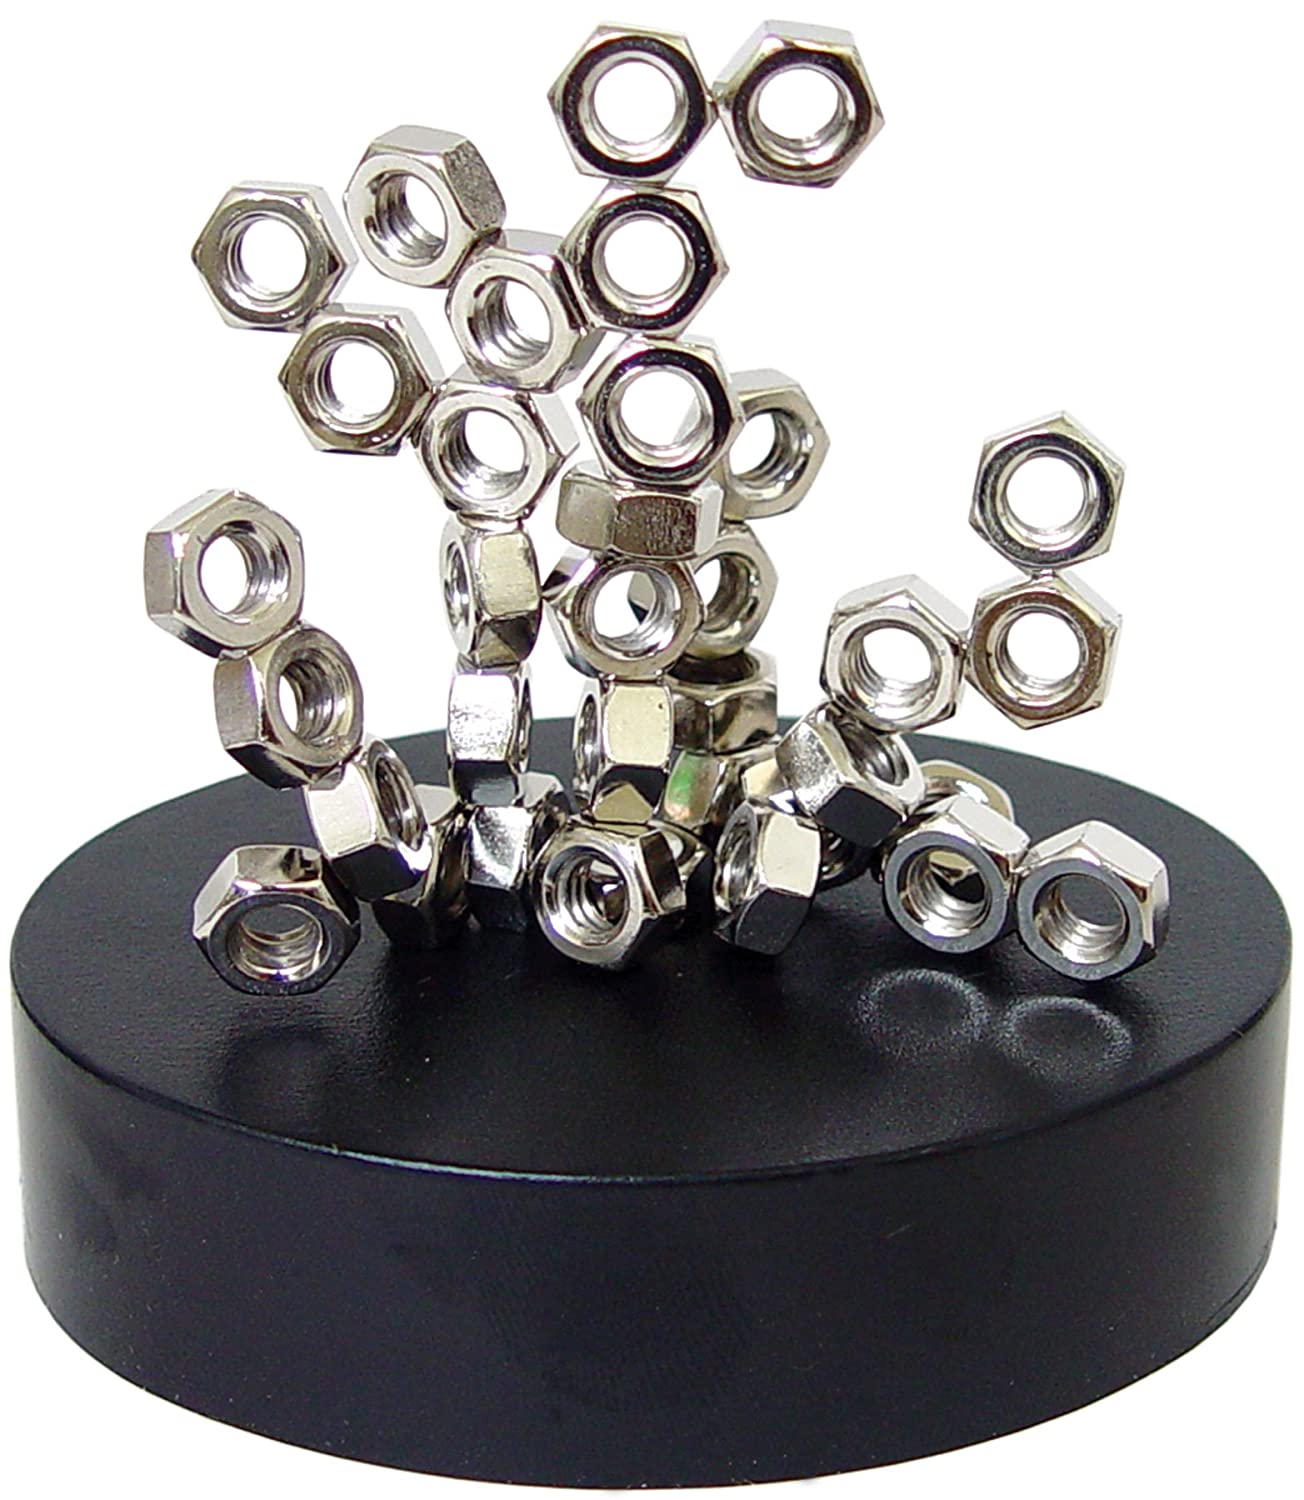 Linlinzz Magnetic Office Sculpture - Stacking Nuts